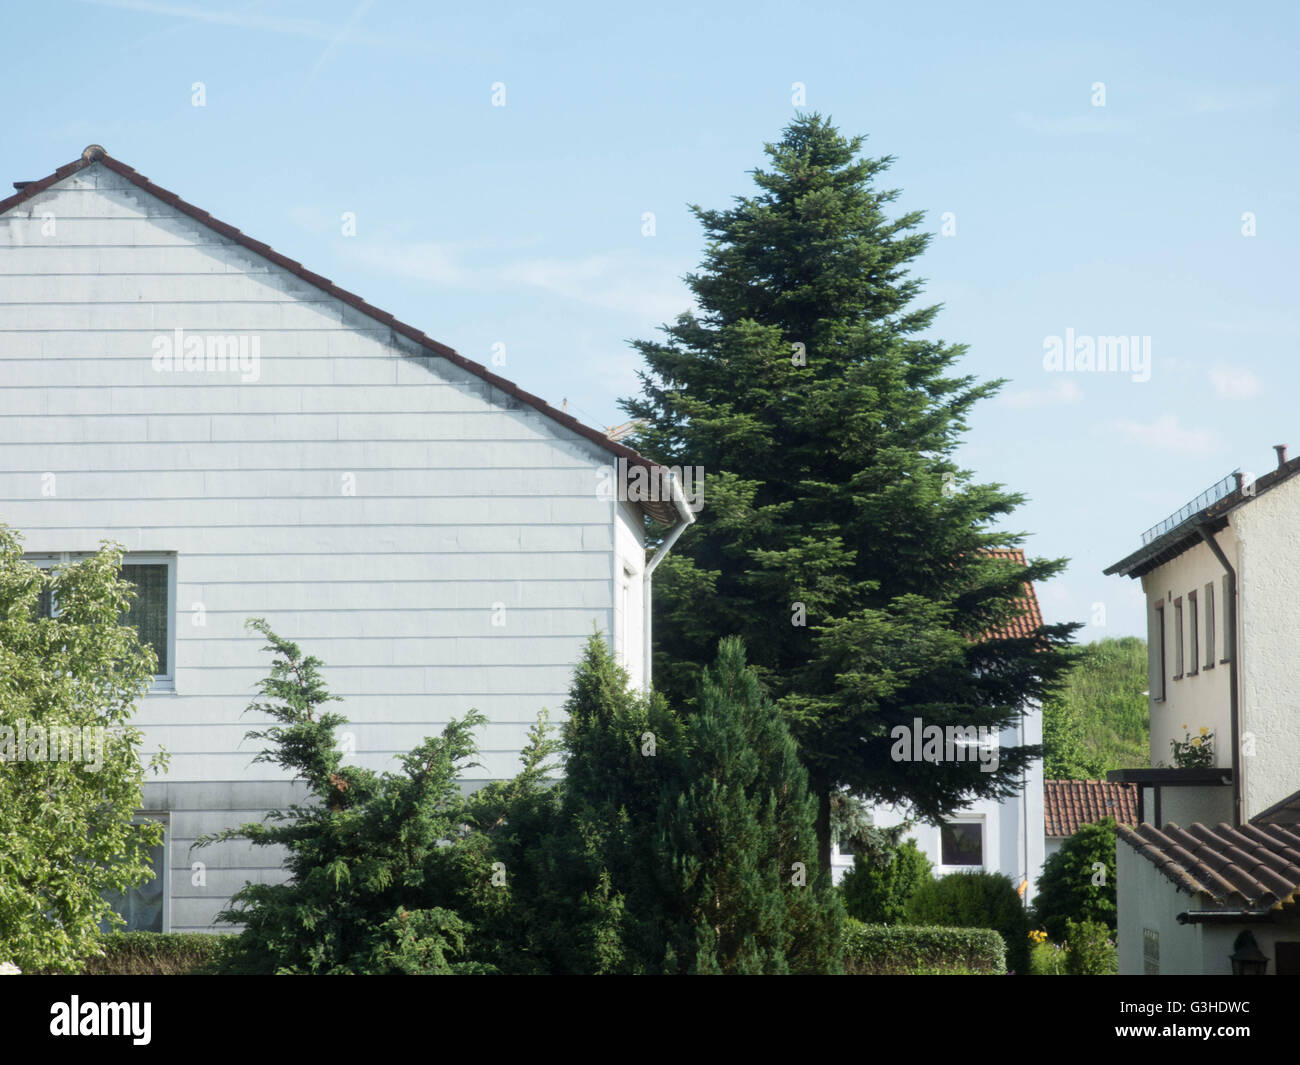 small old house in germany city crailsheim with one tree Stock Photo